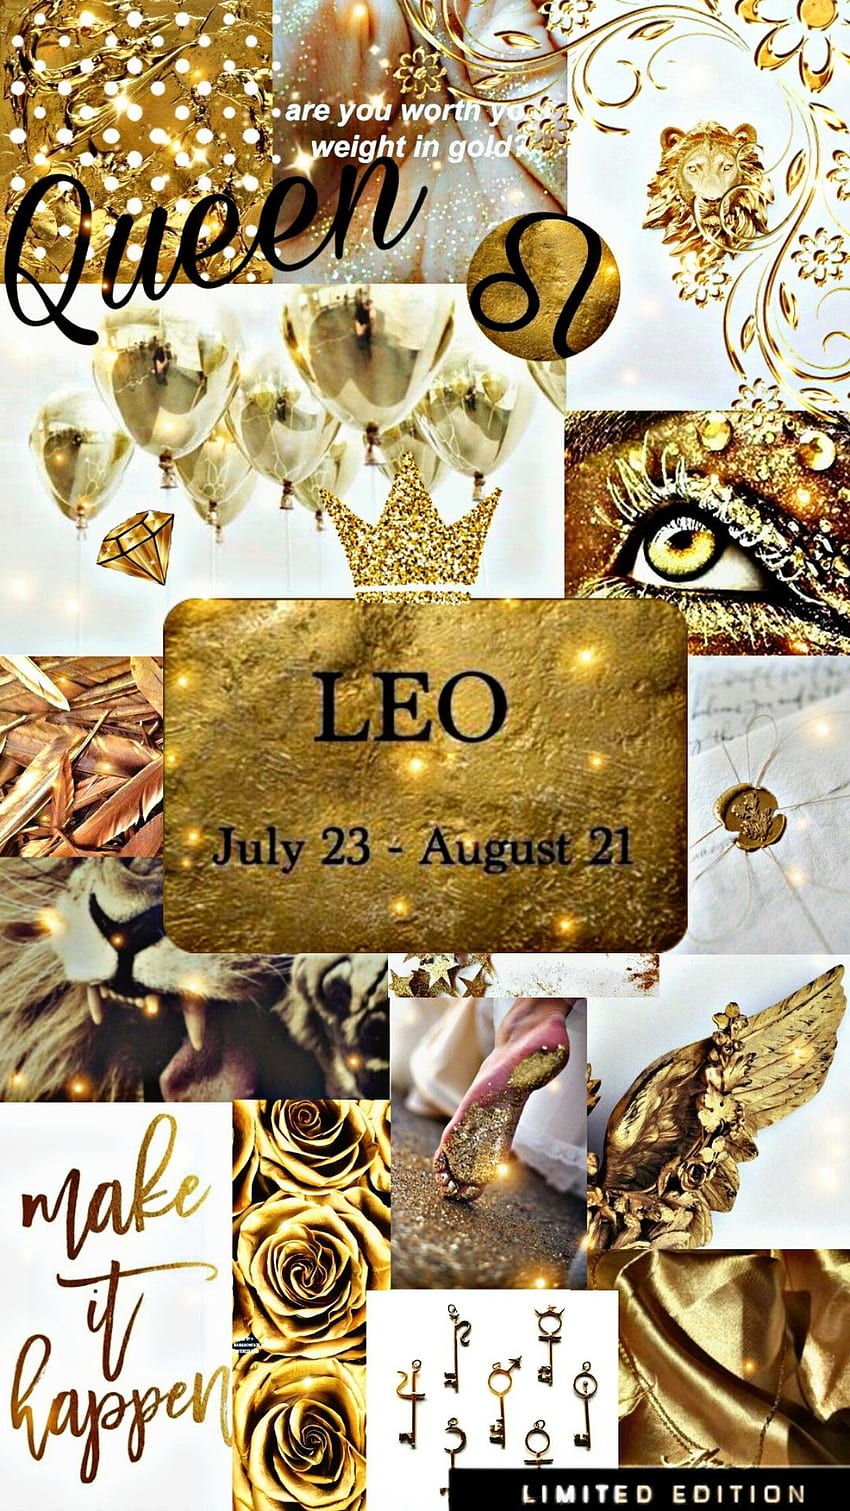 Download A Lion With The Word Leo On It Wallpaper  Wallpaperscom